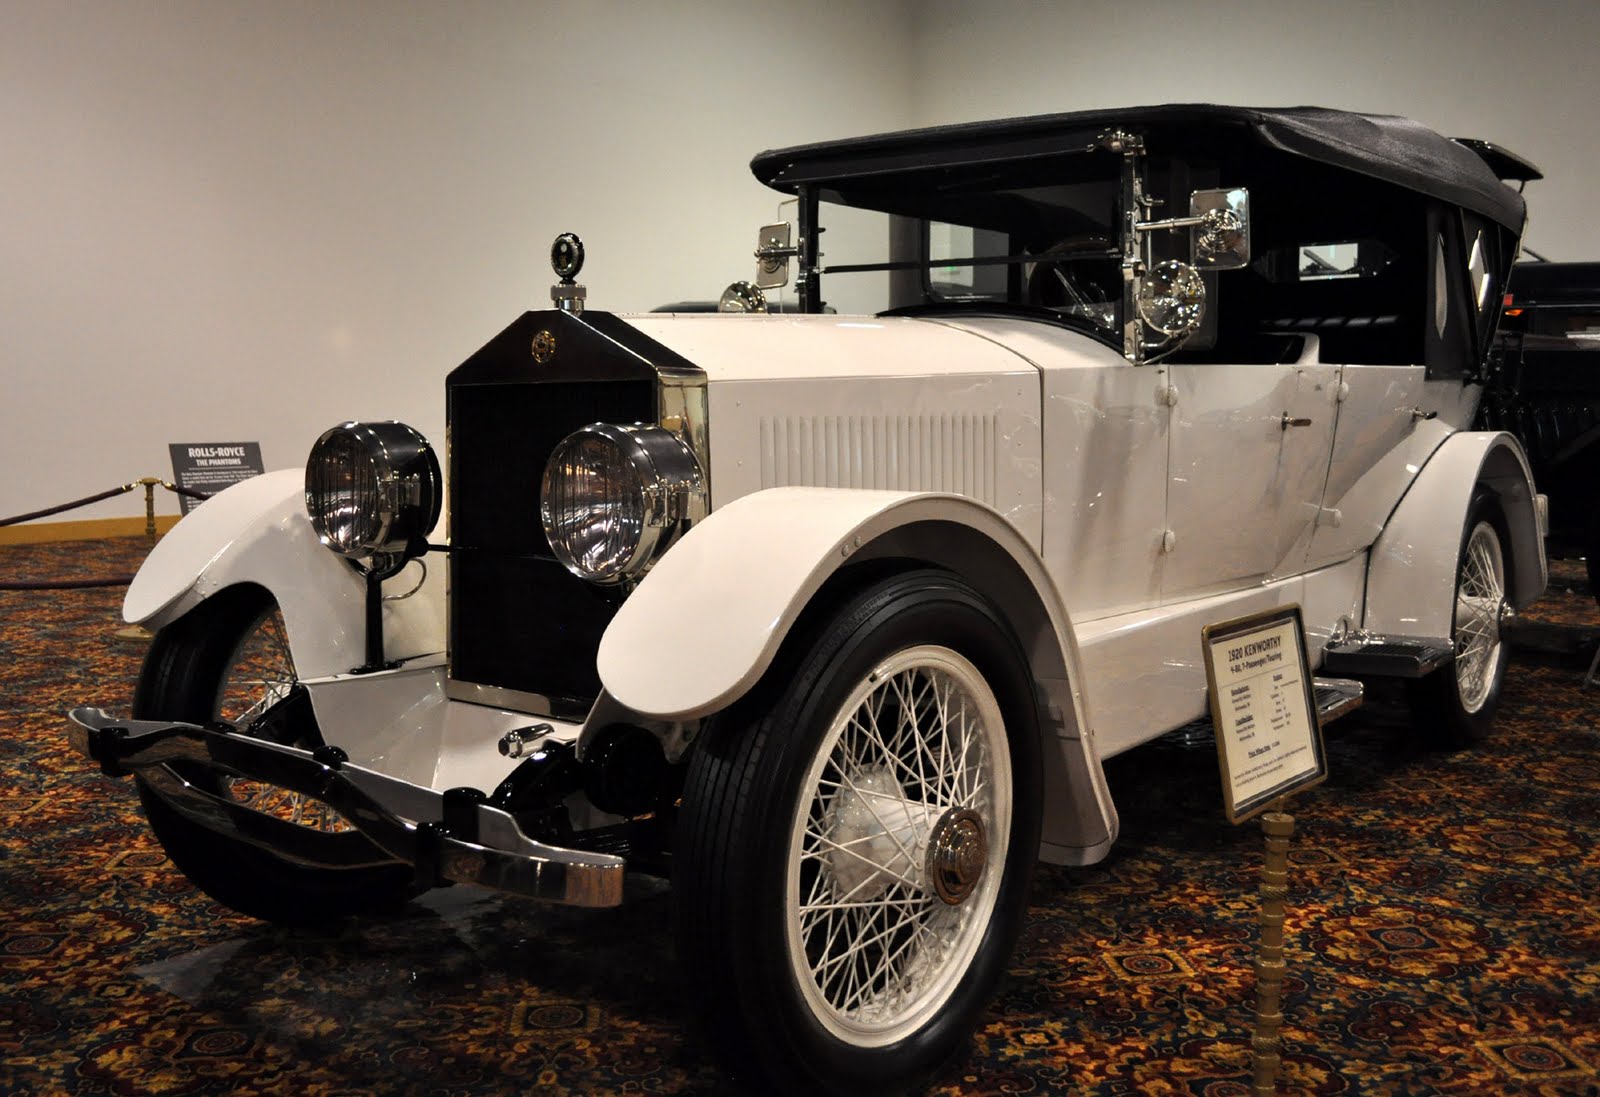 Cars from the 1920